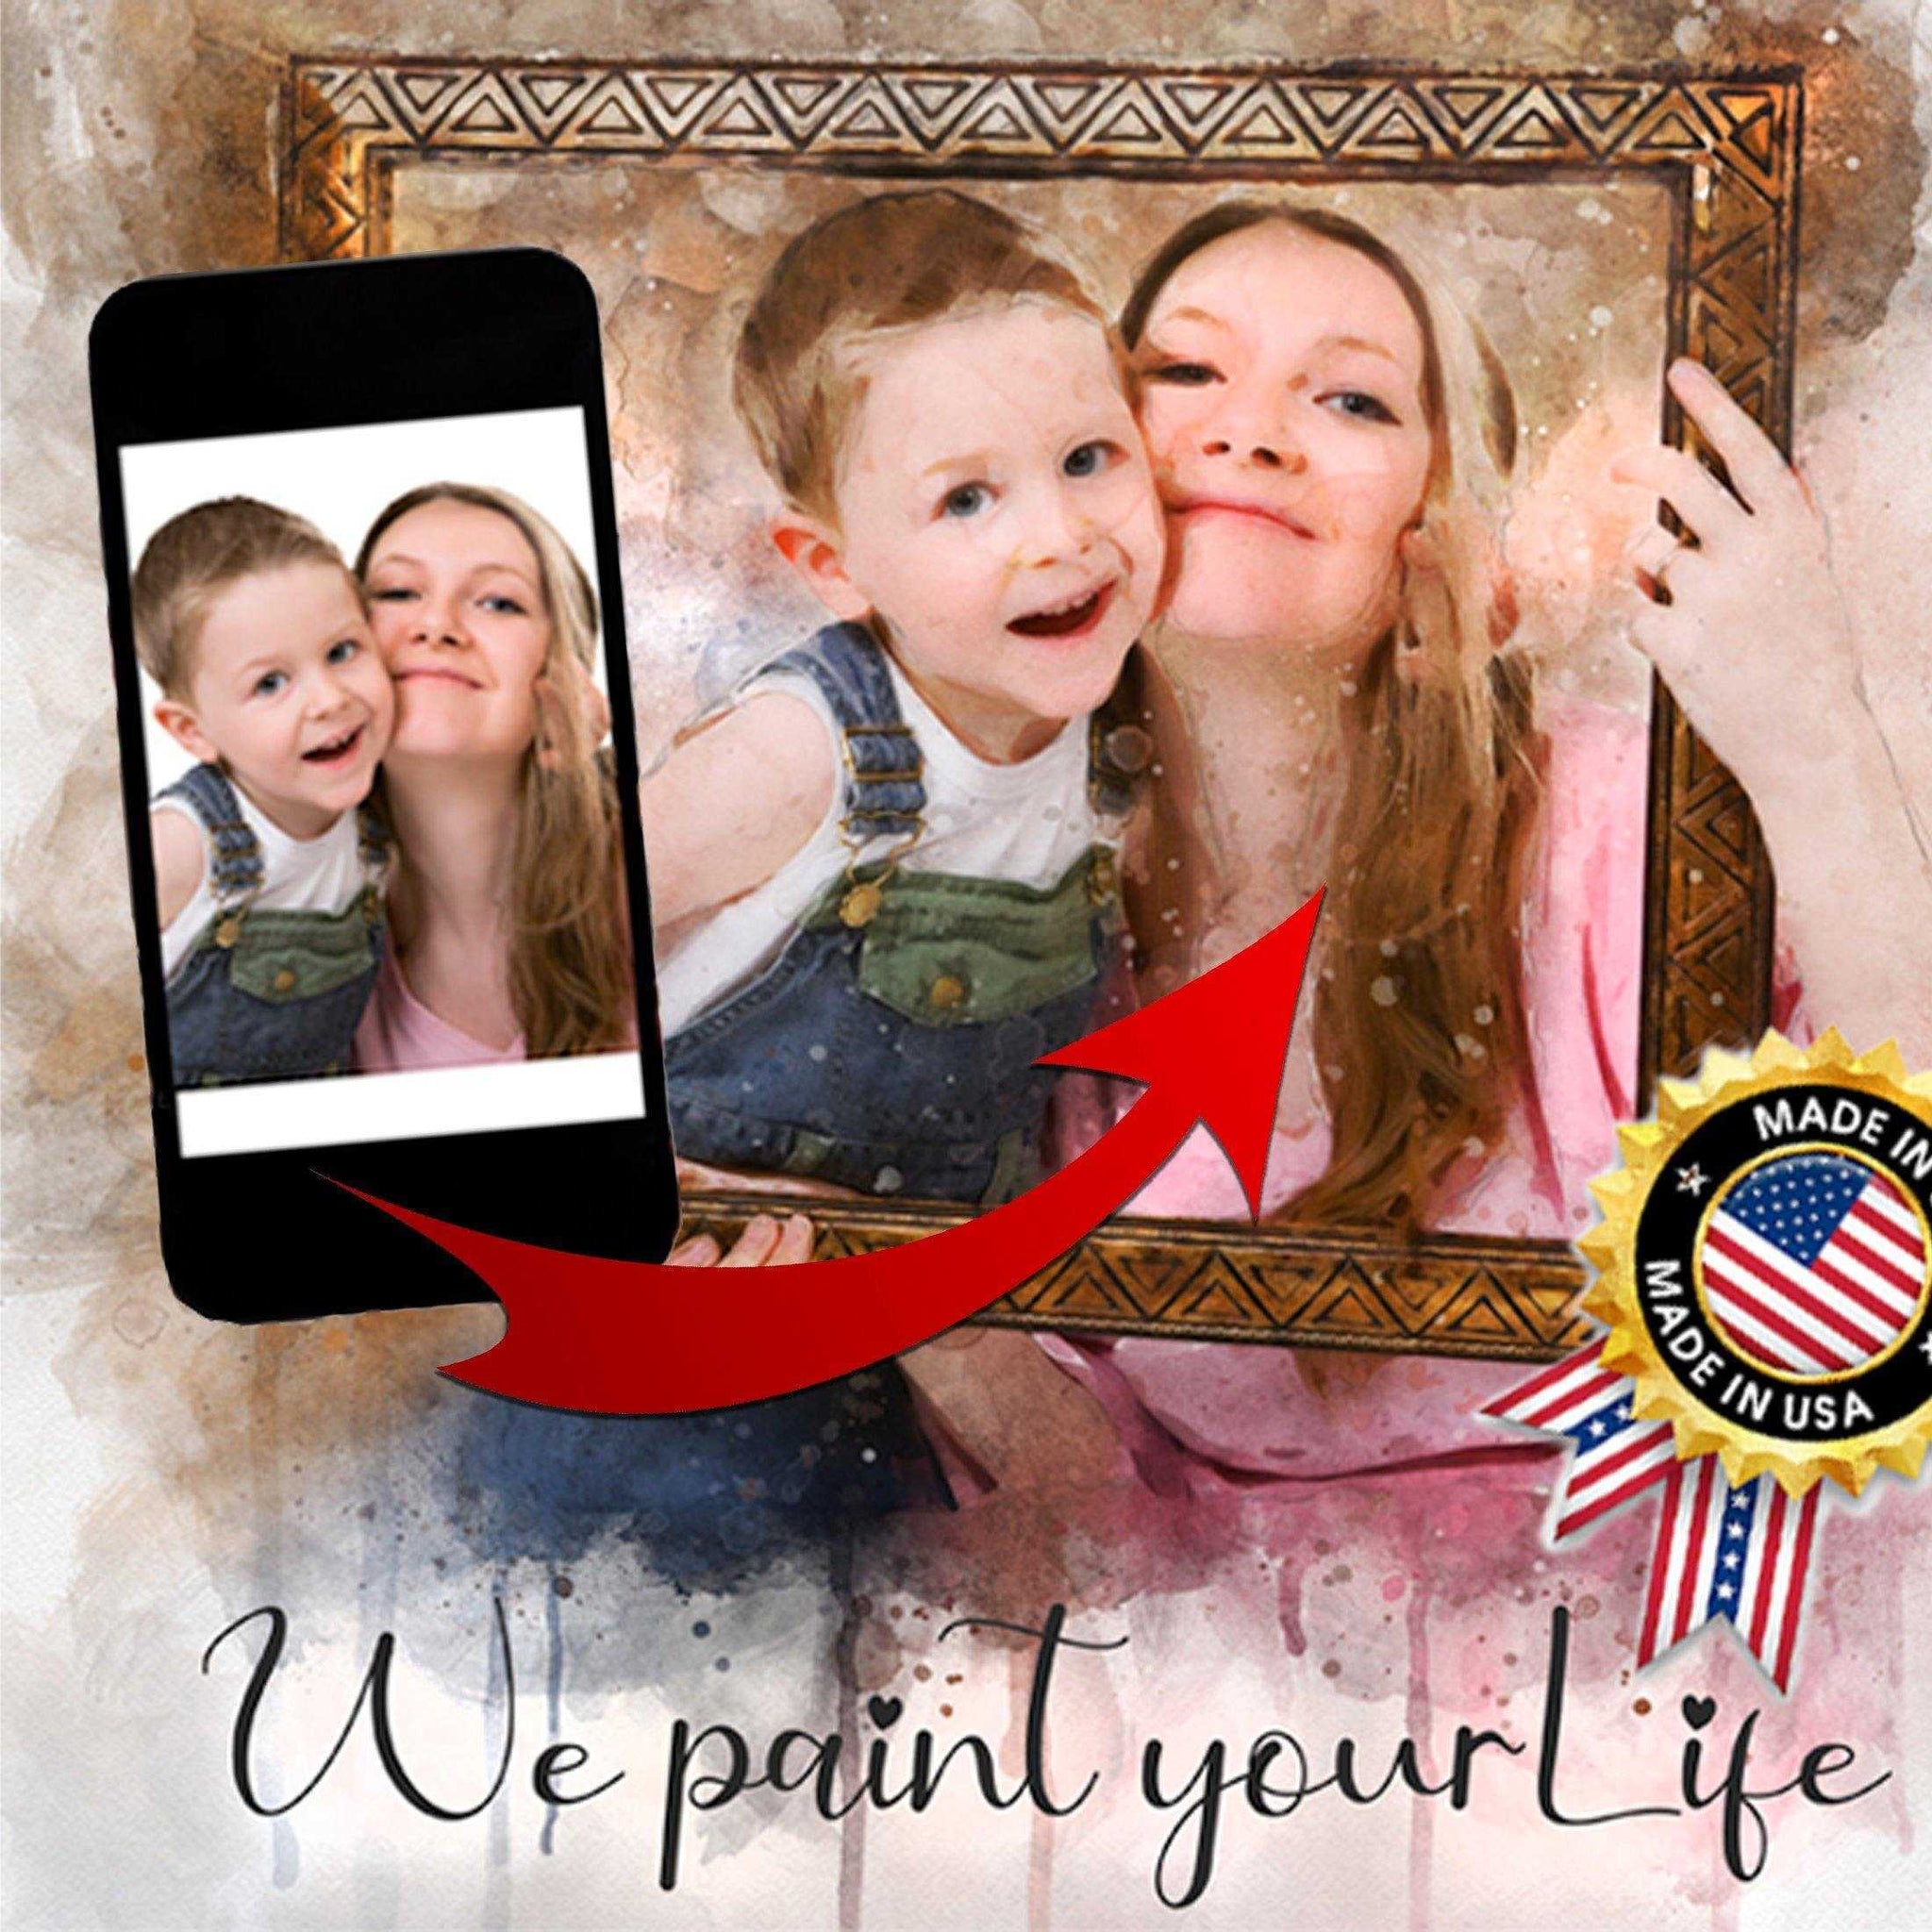 Painting Images | Custom Portrait Painting from Photo - FromPicToArt